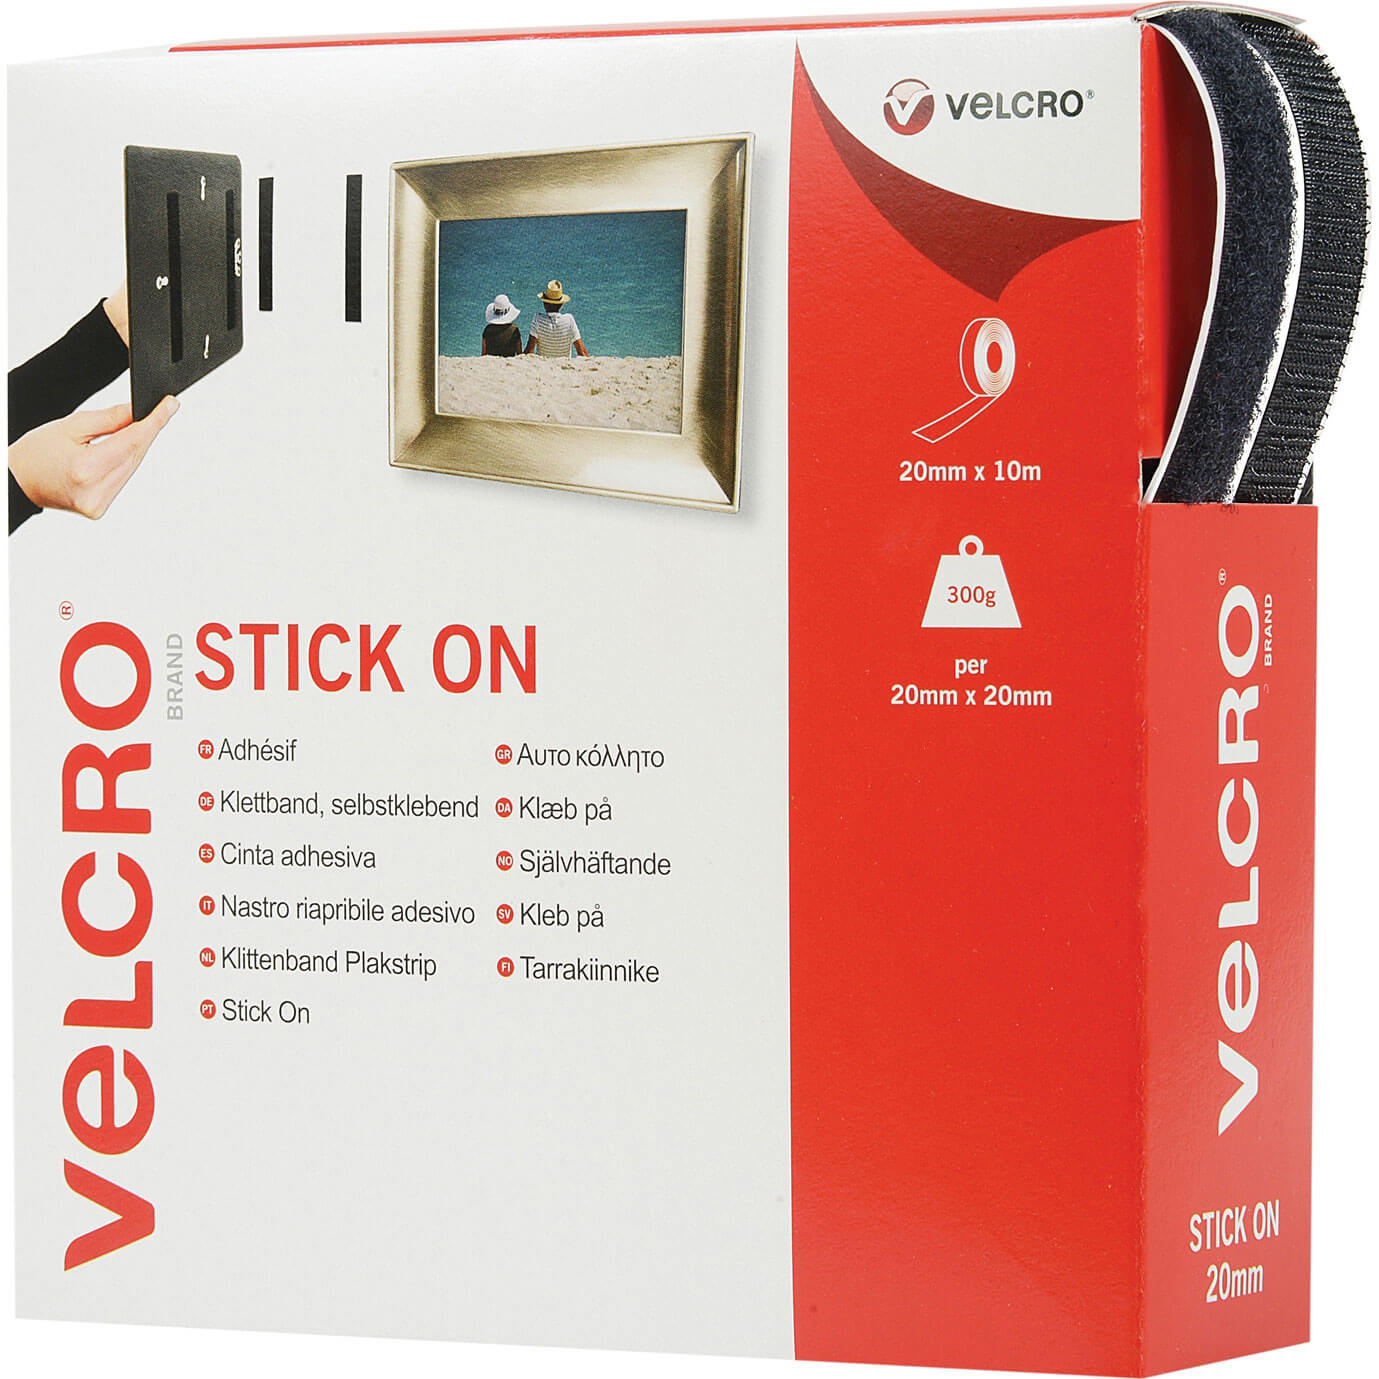 Photo of Velcro Stick On Tape Black 20mm 10m Pack Of 1